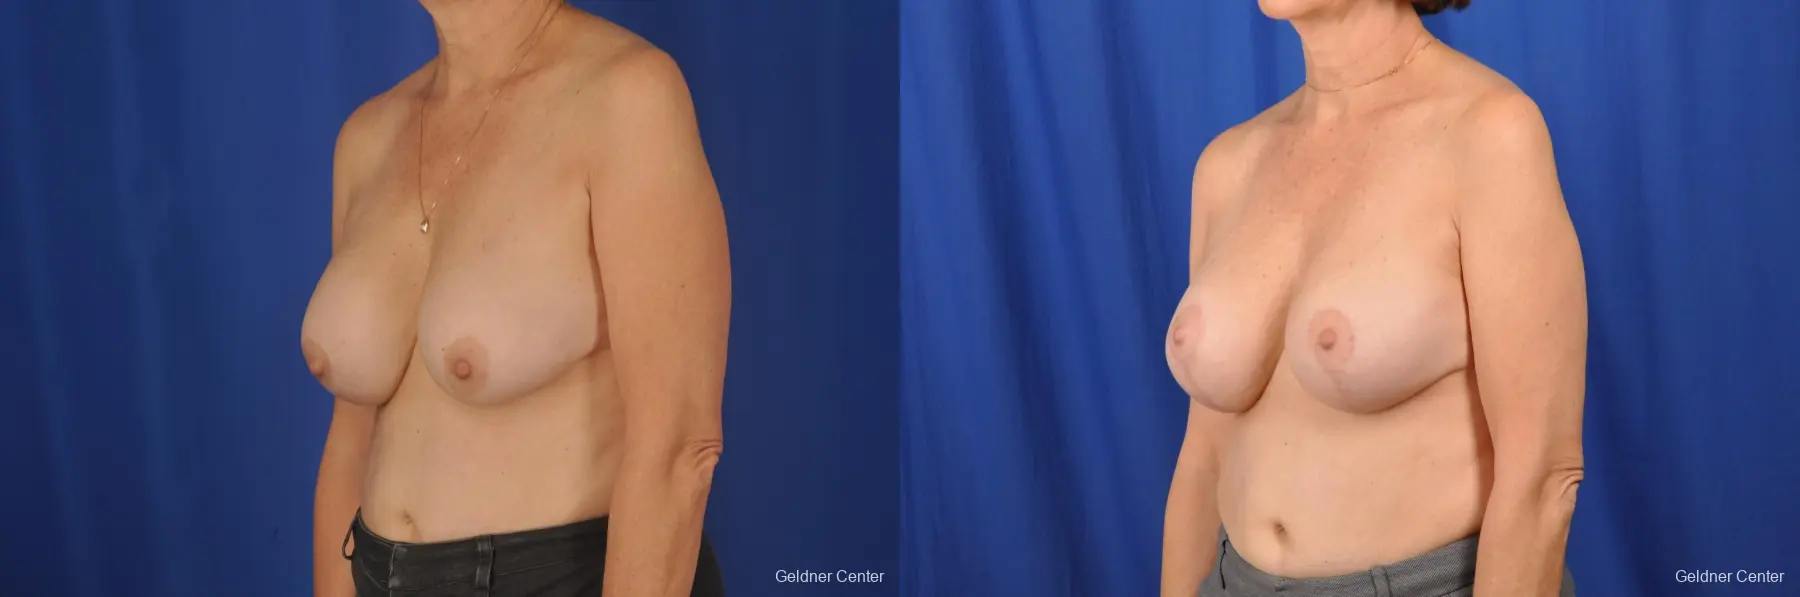 Breast Lift Hinsdale, Chicago 2058 - Before and After 4